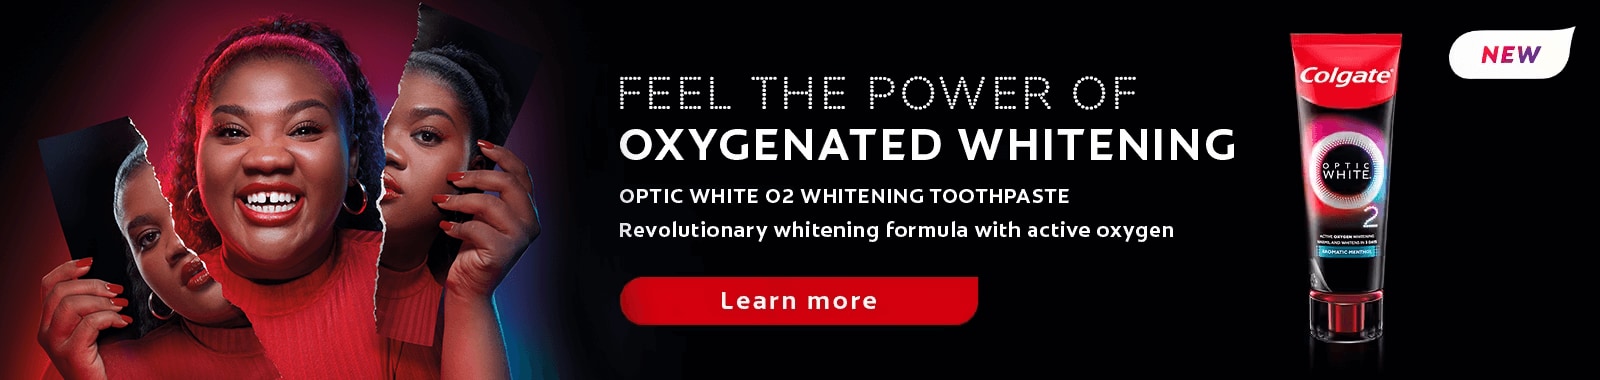 Feel the power of oxygenated whitening